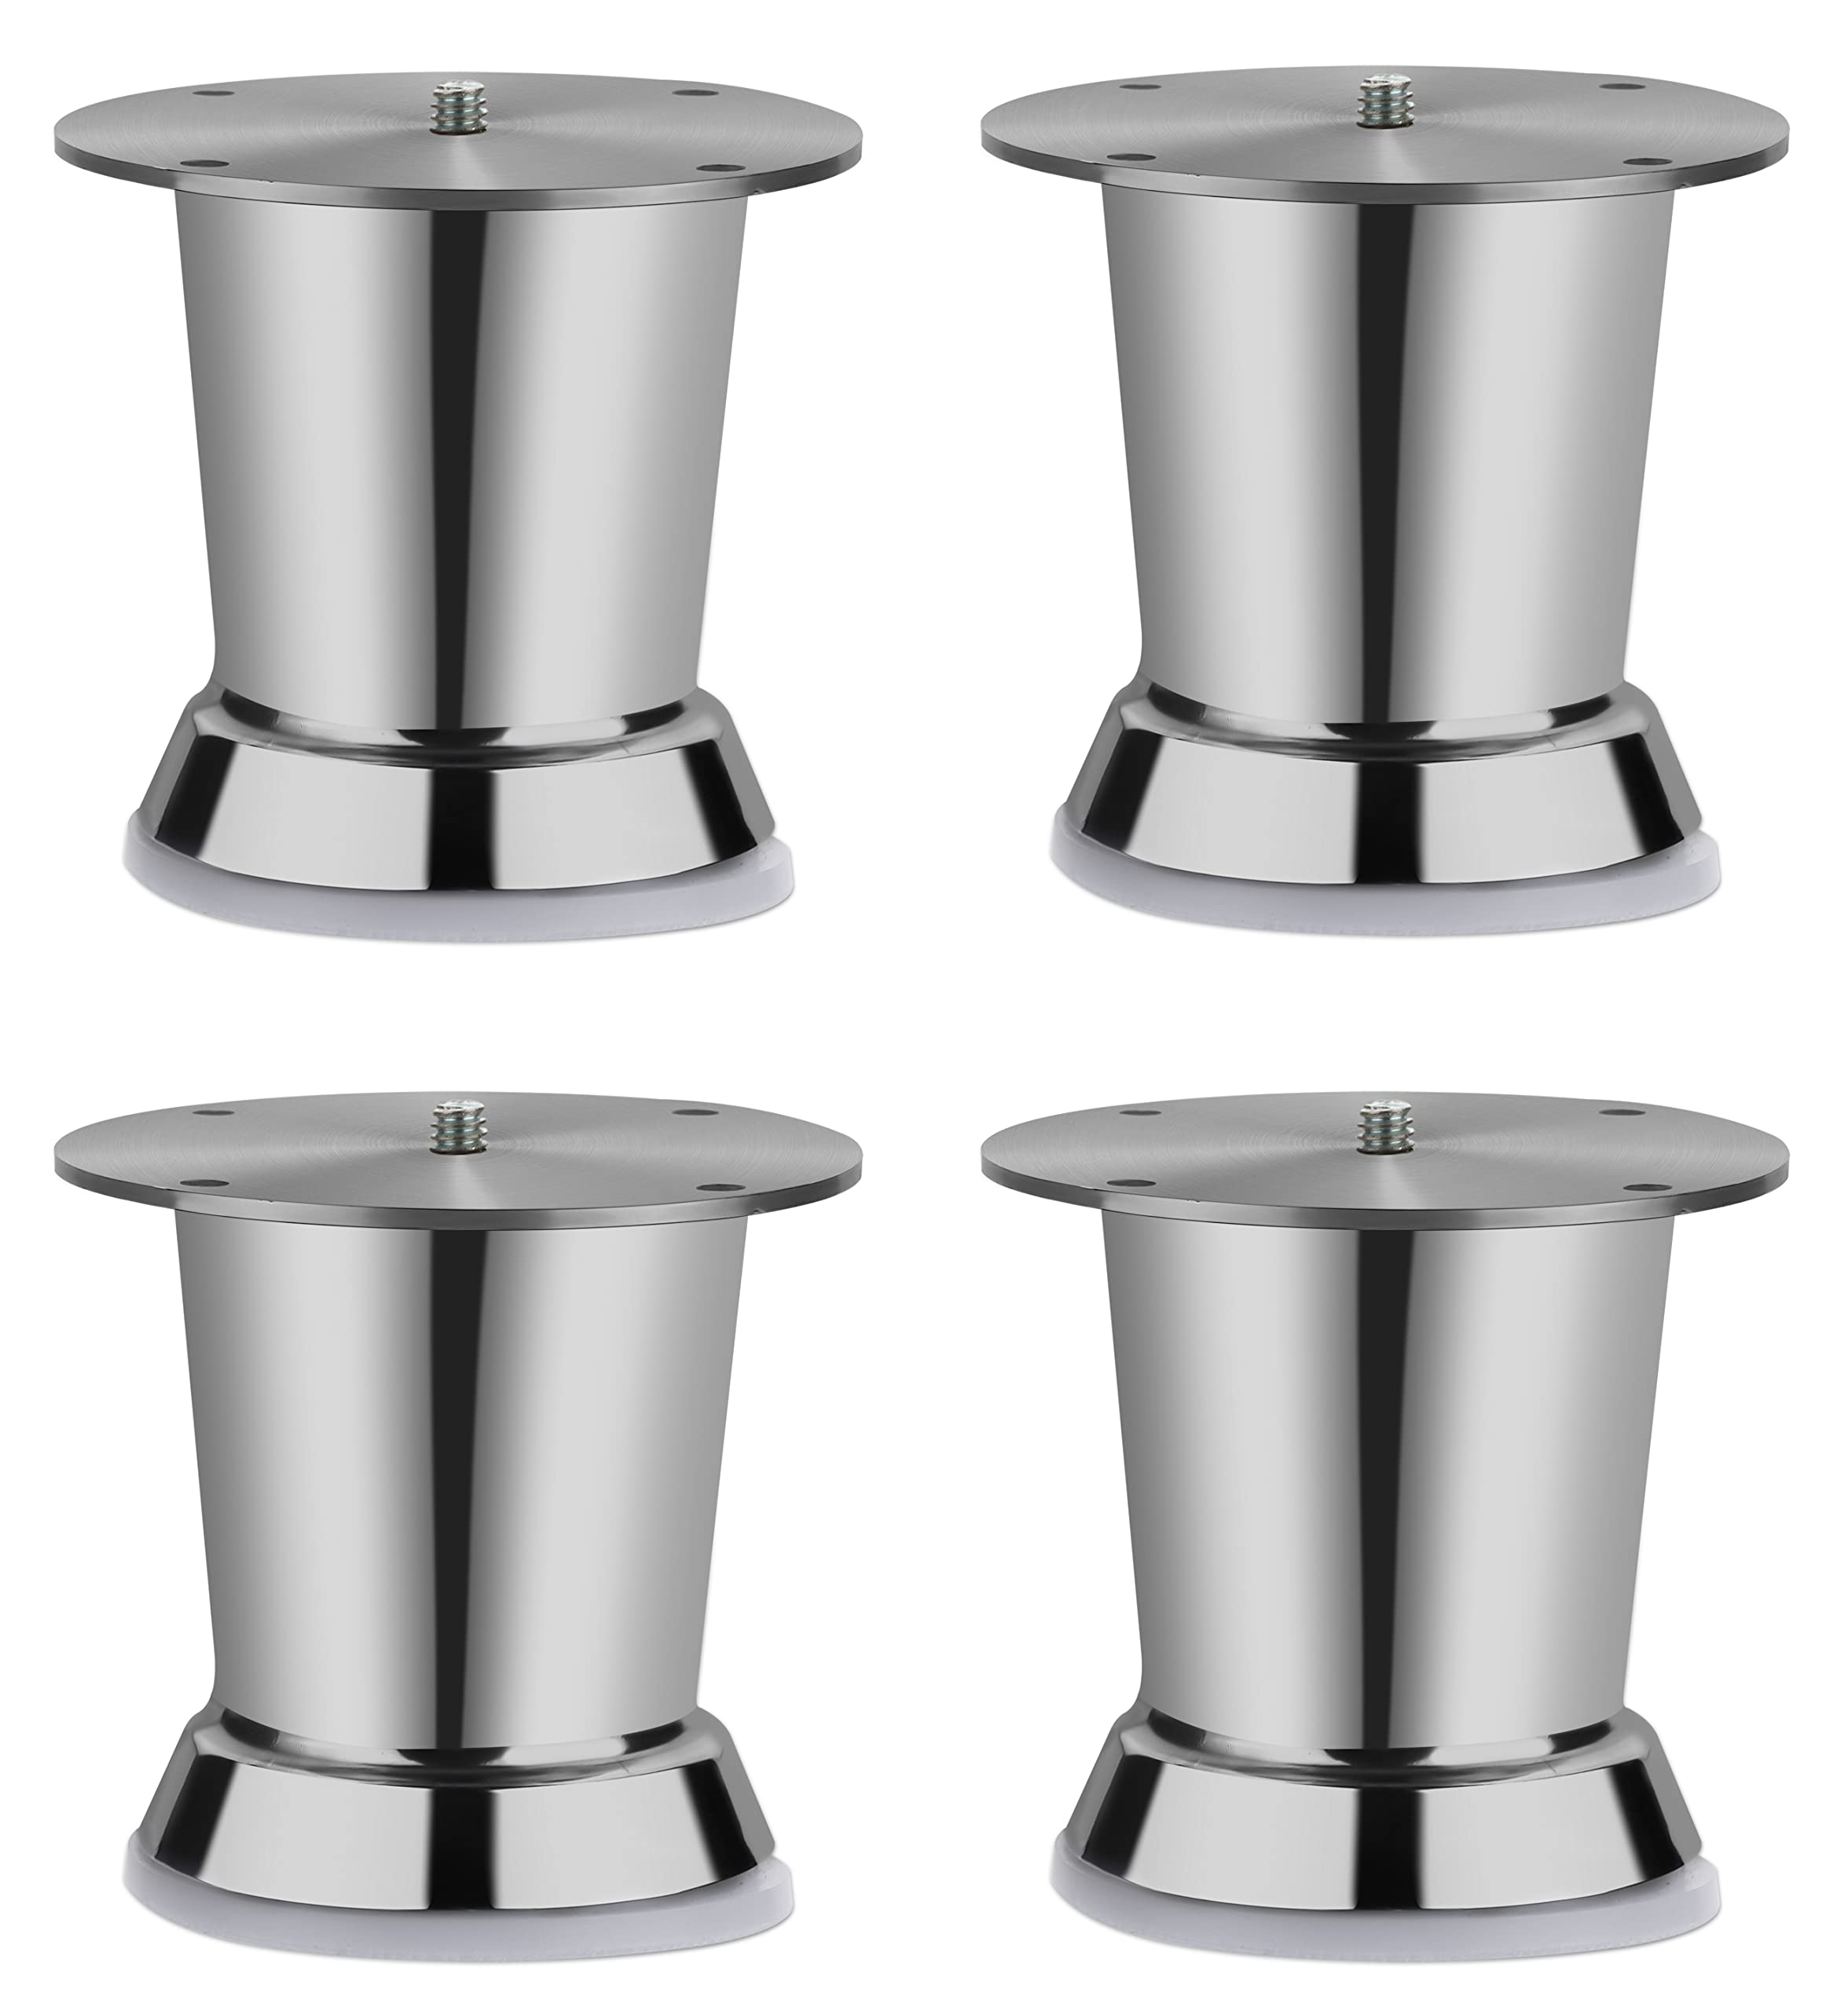 Plantex Heavy Duty Stainless Steel 3 inch Sofa Leg/Bed Furniture Leg Pair for Home Furnitures (DTS-51, Chrome) – Pack of 4